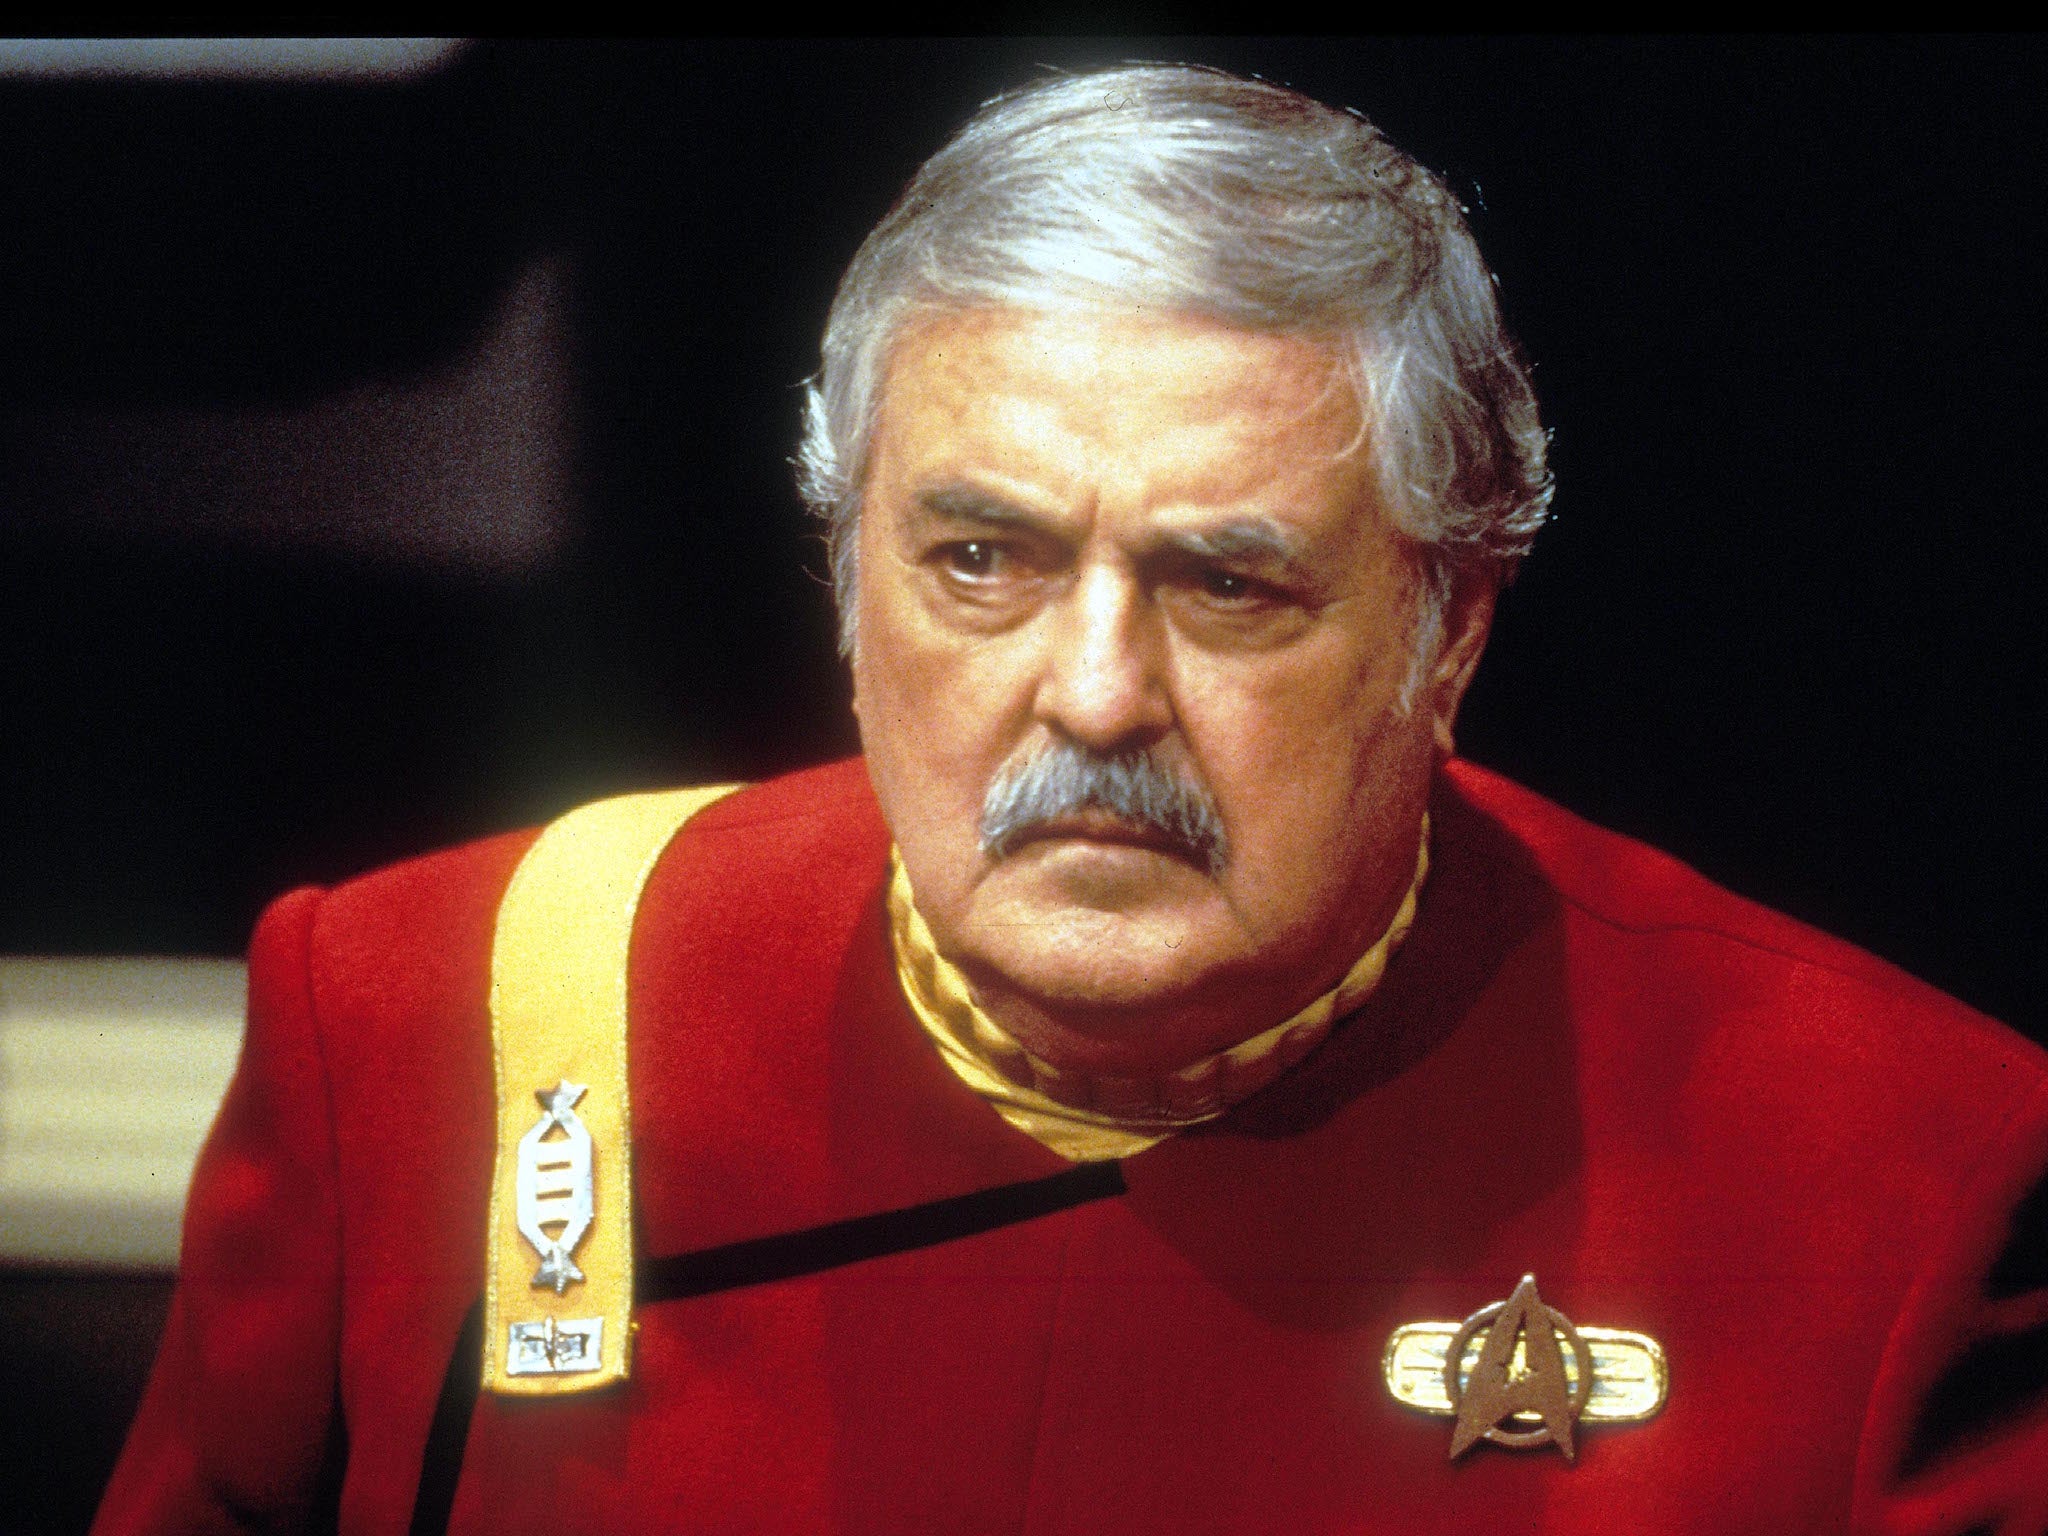 Ashes of Star Trek 'Scotty' actor James Doohan smuggled aboard the